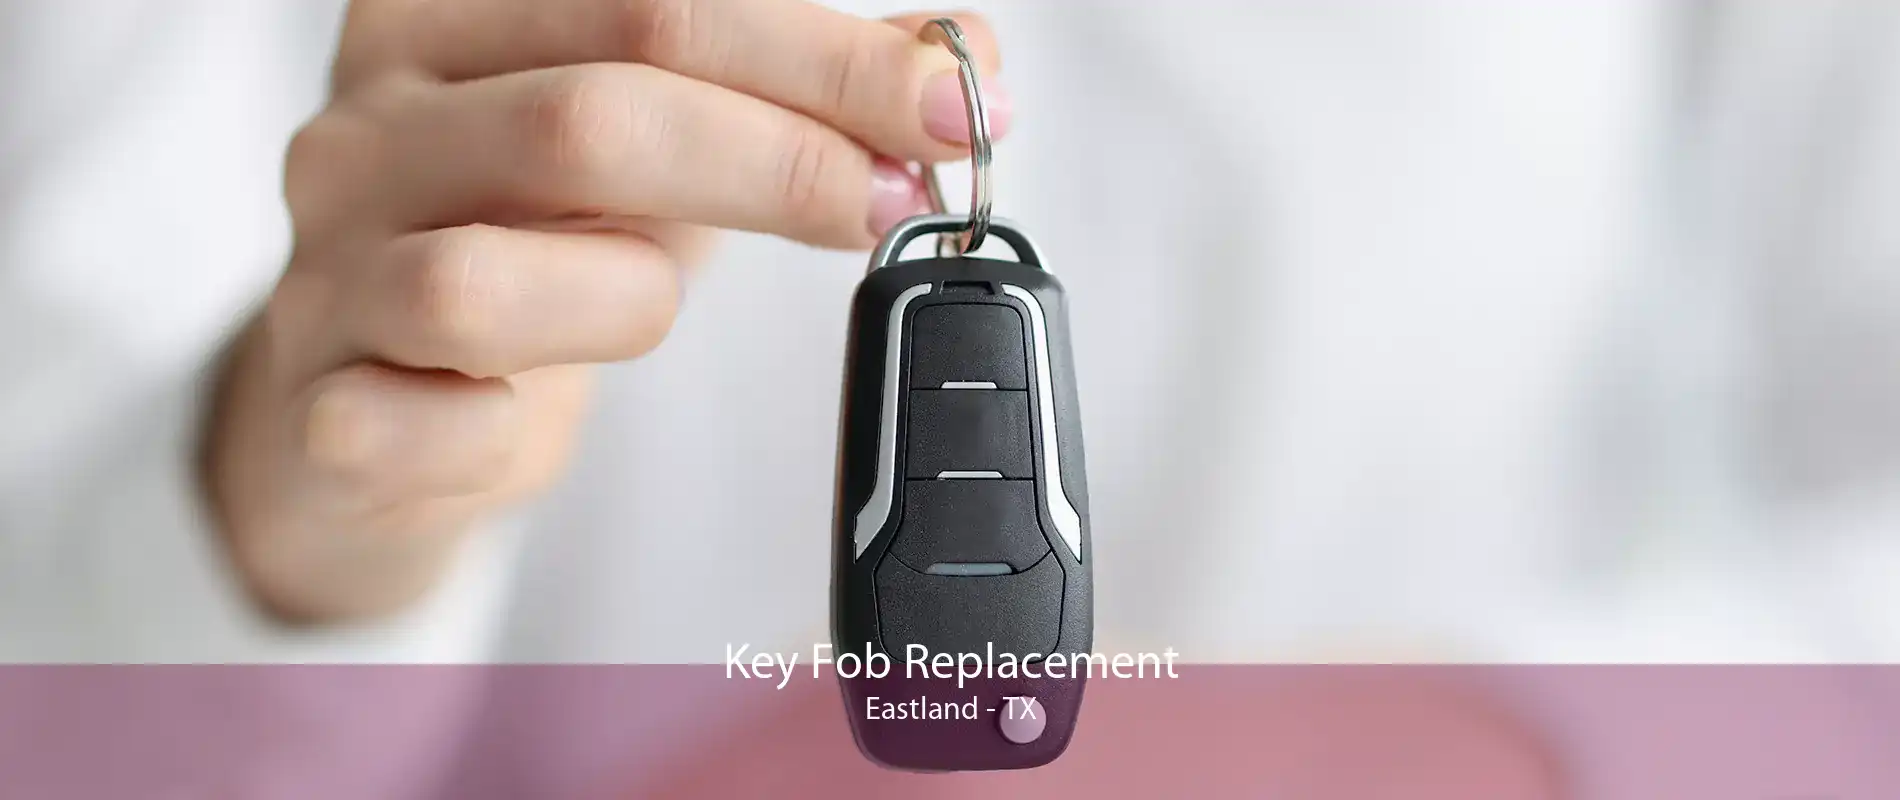 Key Fob Replacement Eastland - TX